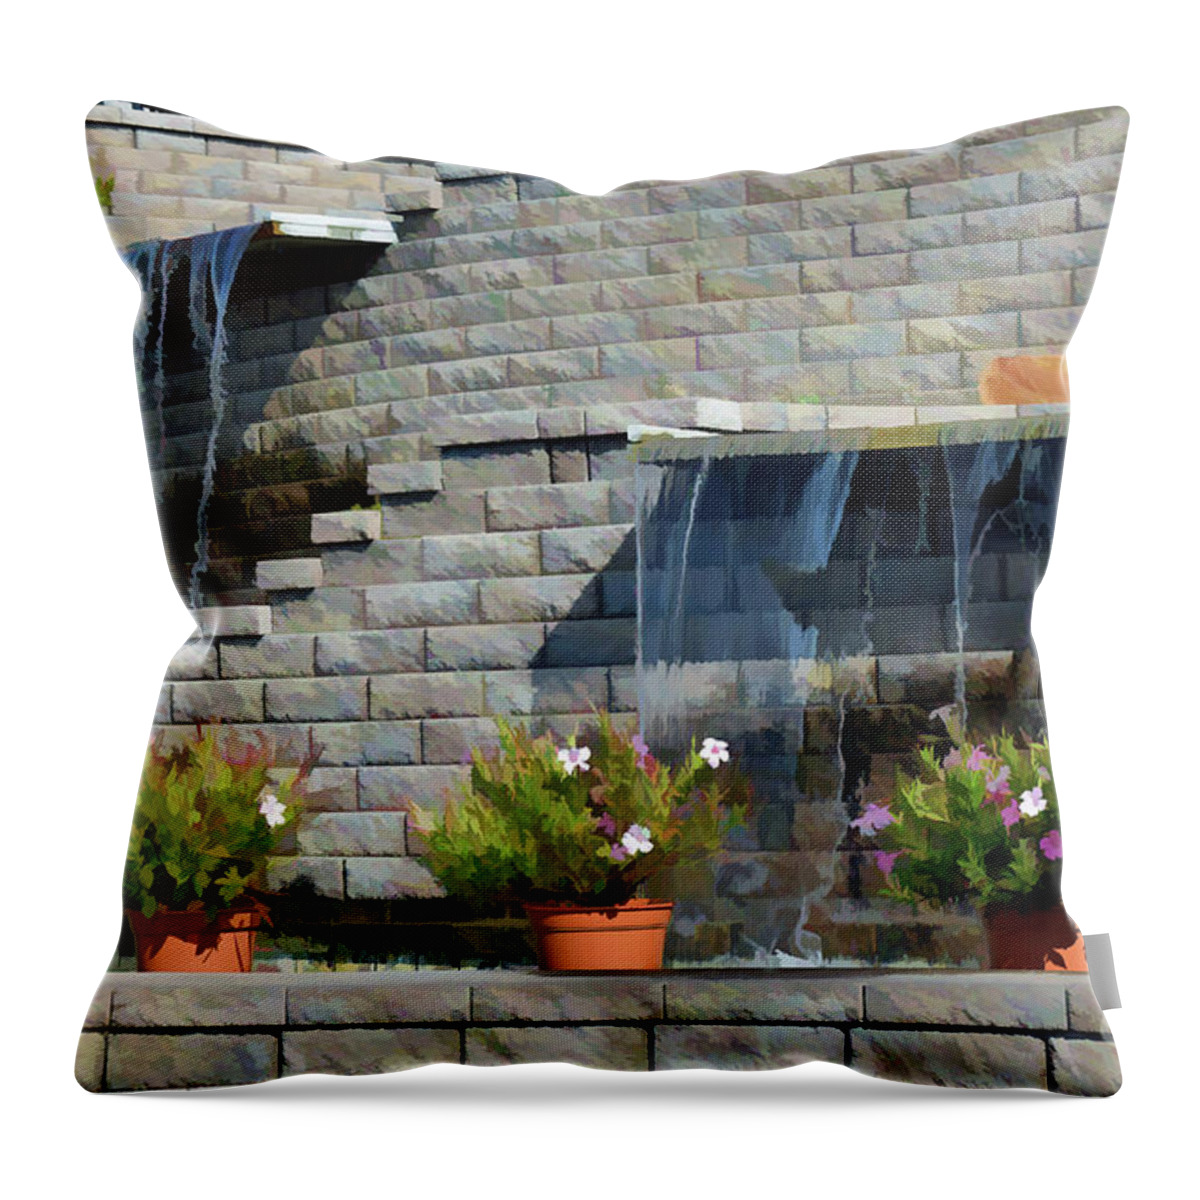 Landscape Wall Throw Pillow featuring the photograph Water Wall with Flowers by Roberta Byram